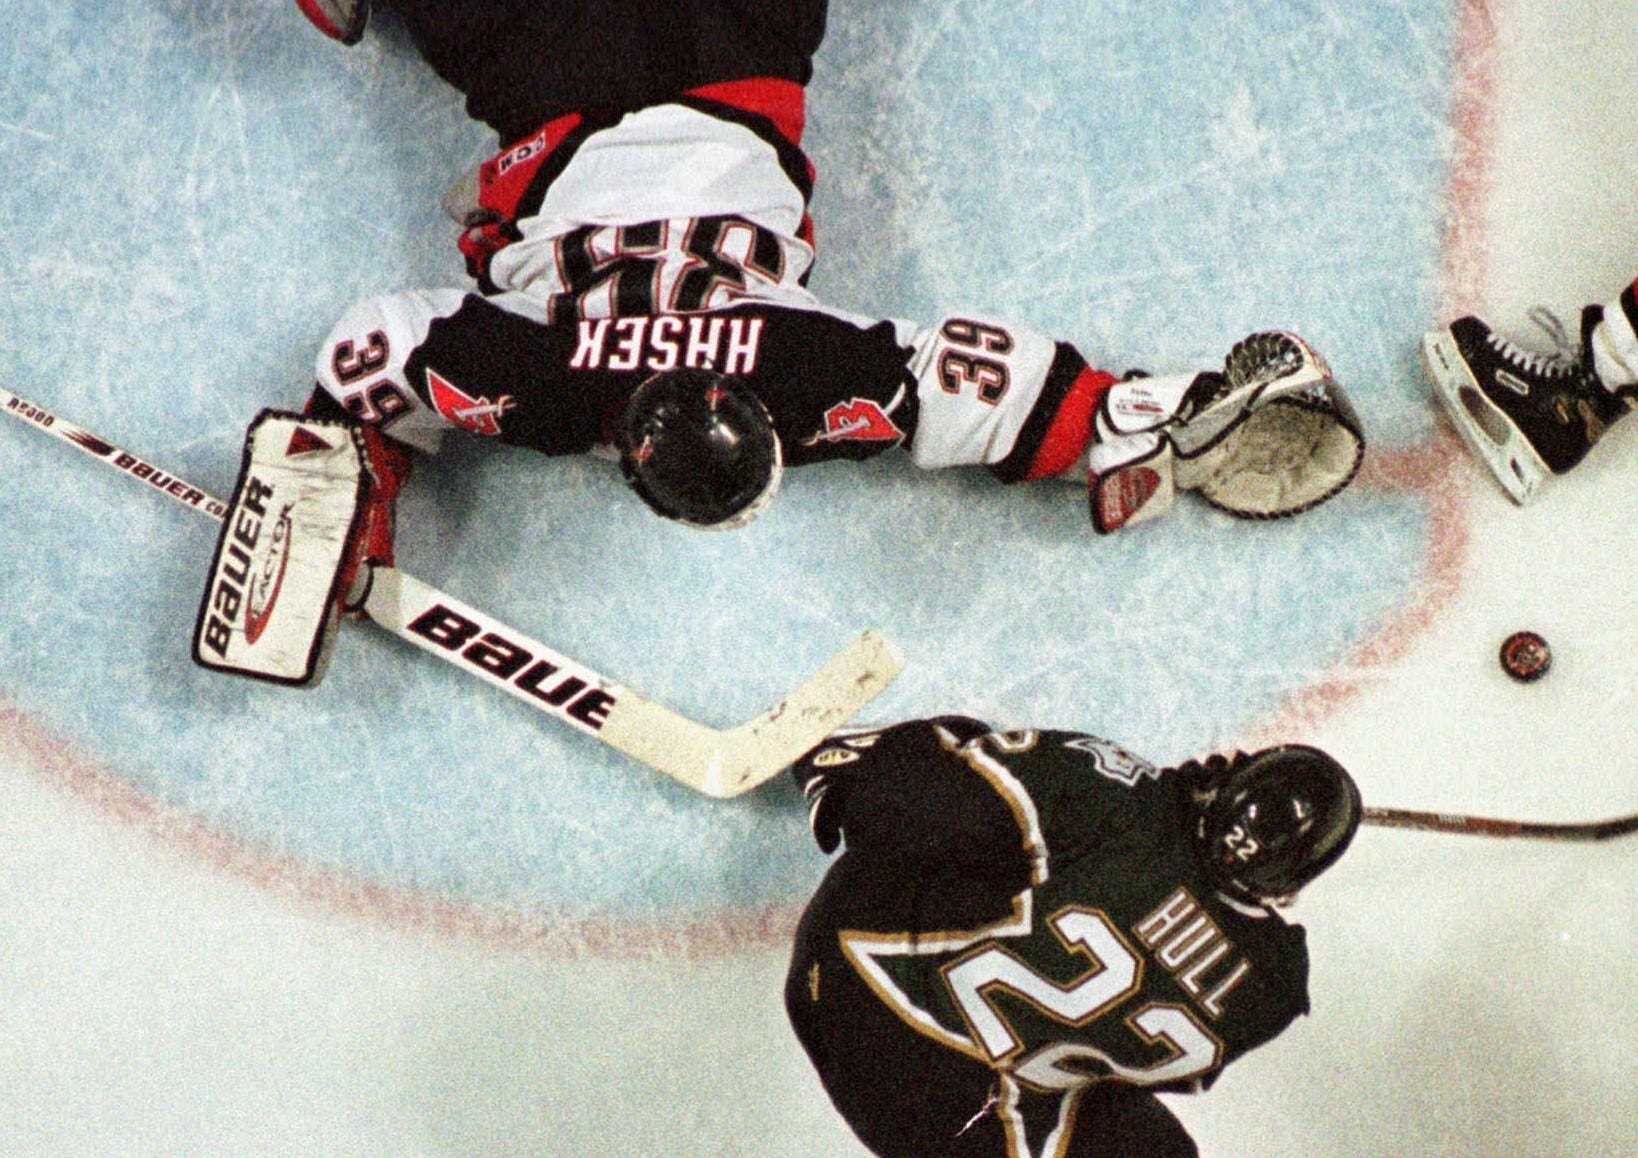 NHL playoffs have often been tilted by controversial calls: Here are some of the most memorable